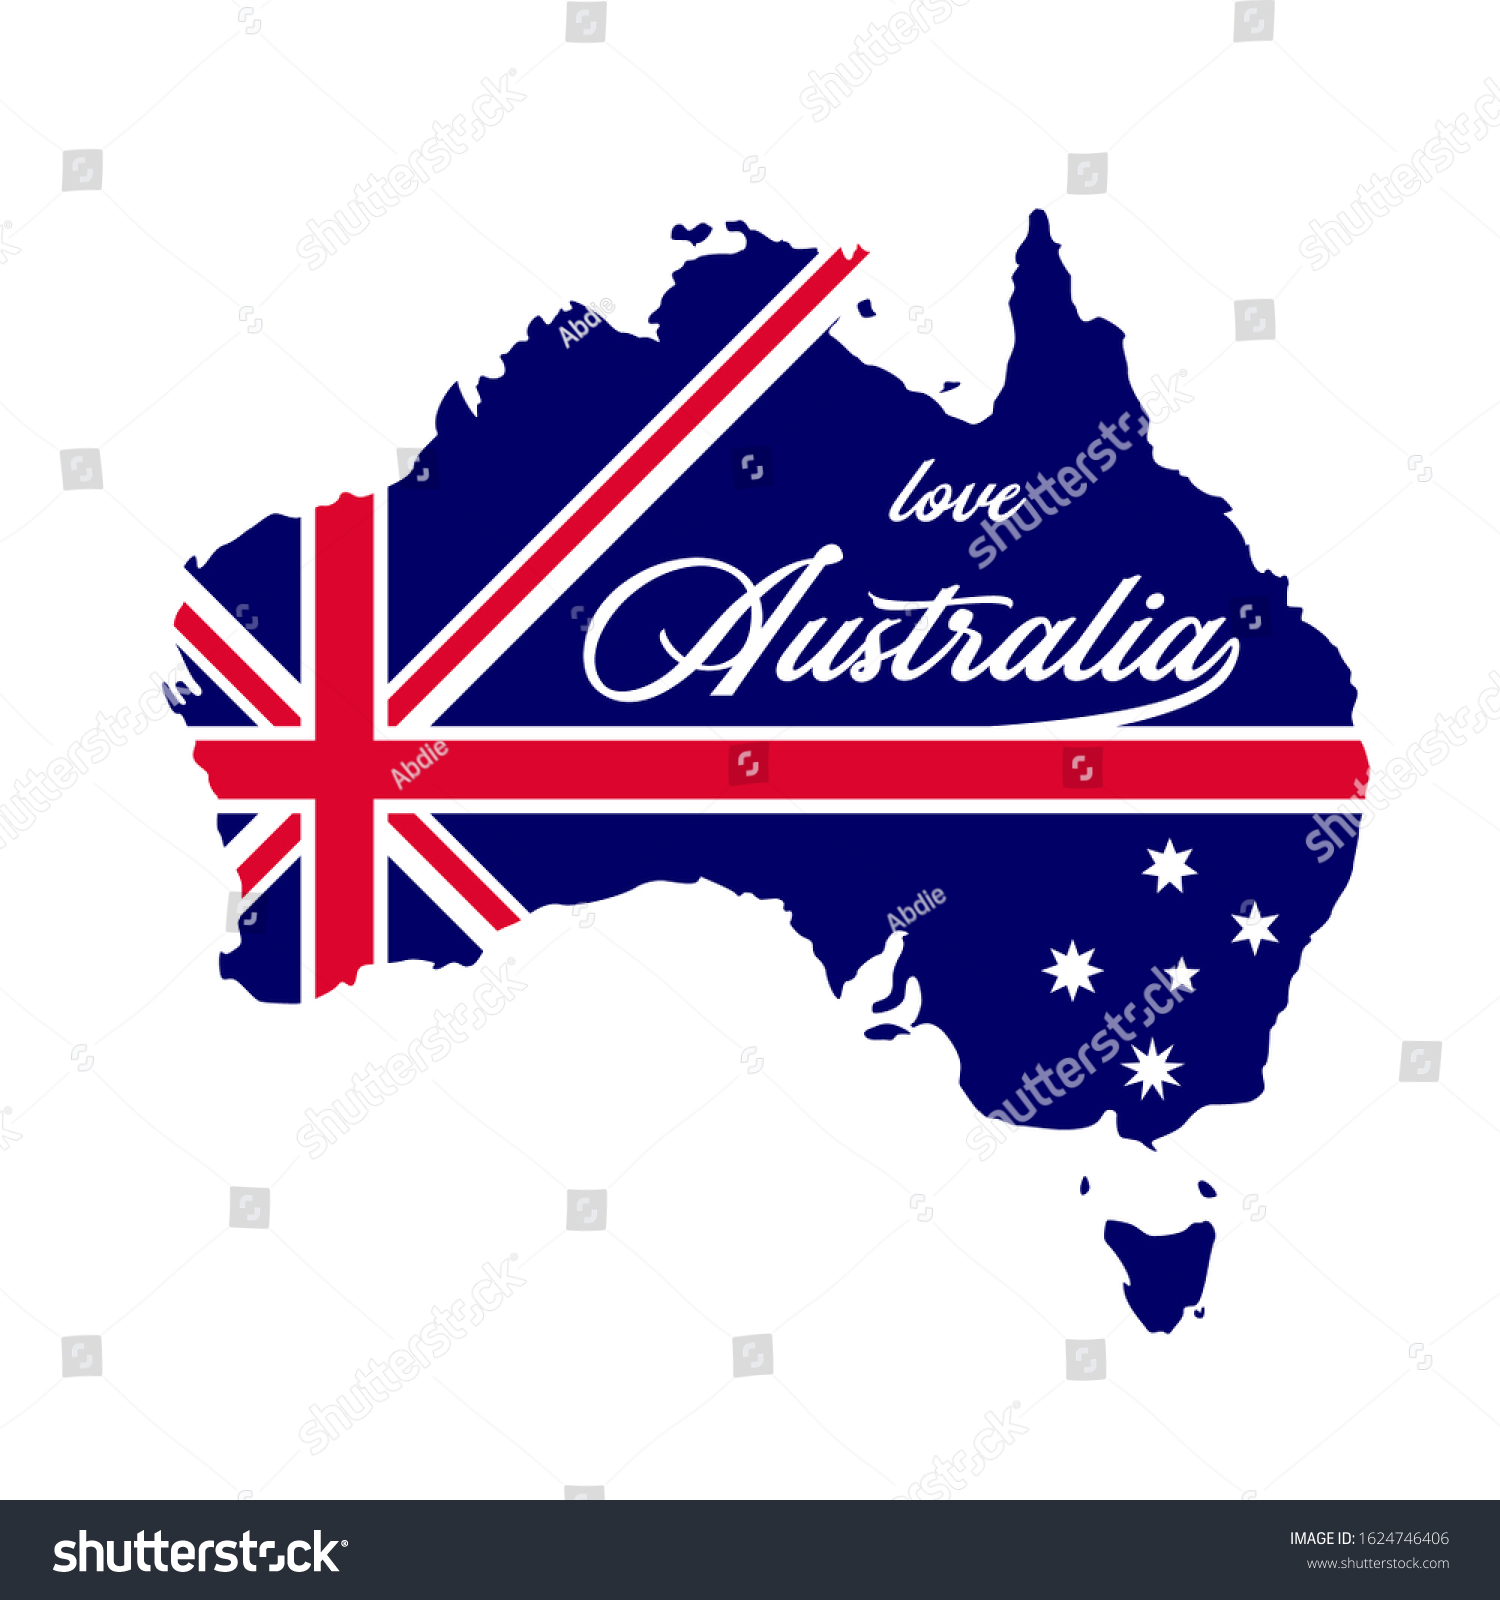 SVG of Australia map country with blue australia flag inside vector illustration good for merchandise or t-shirt printing svg